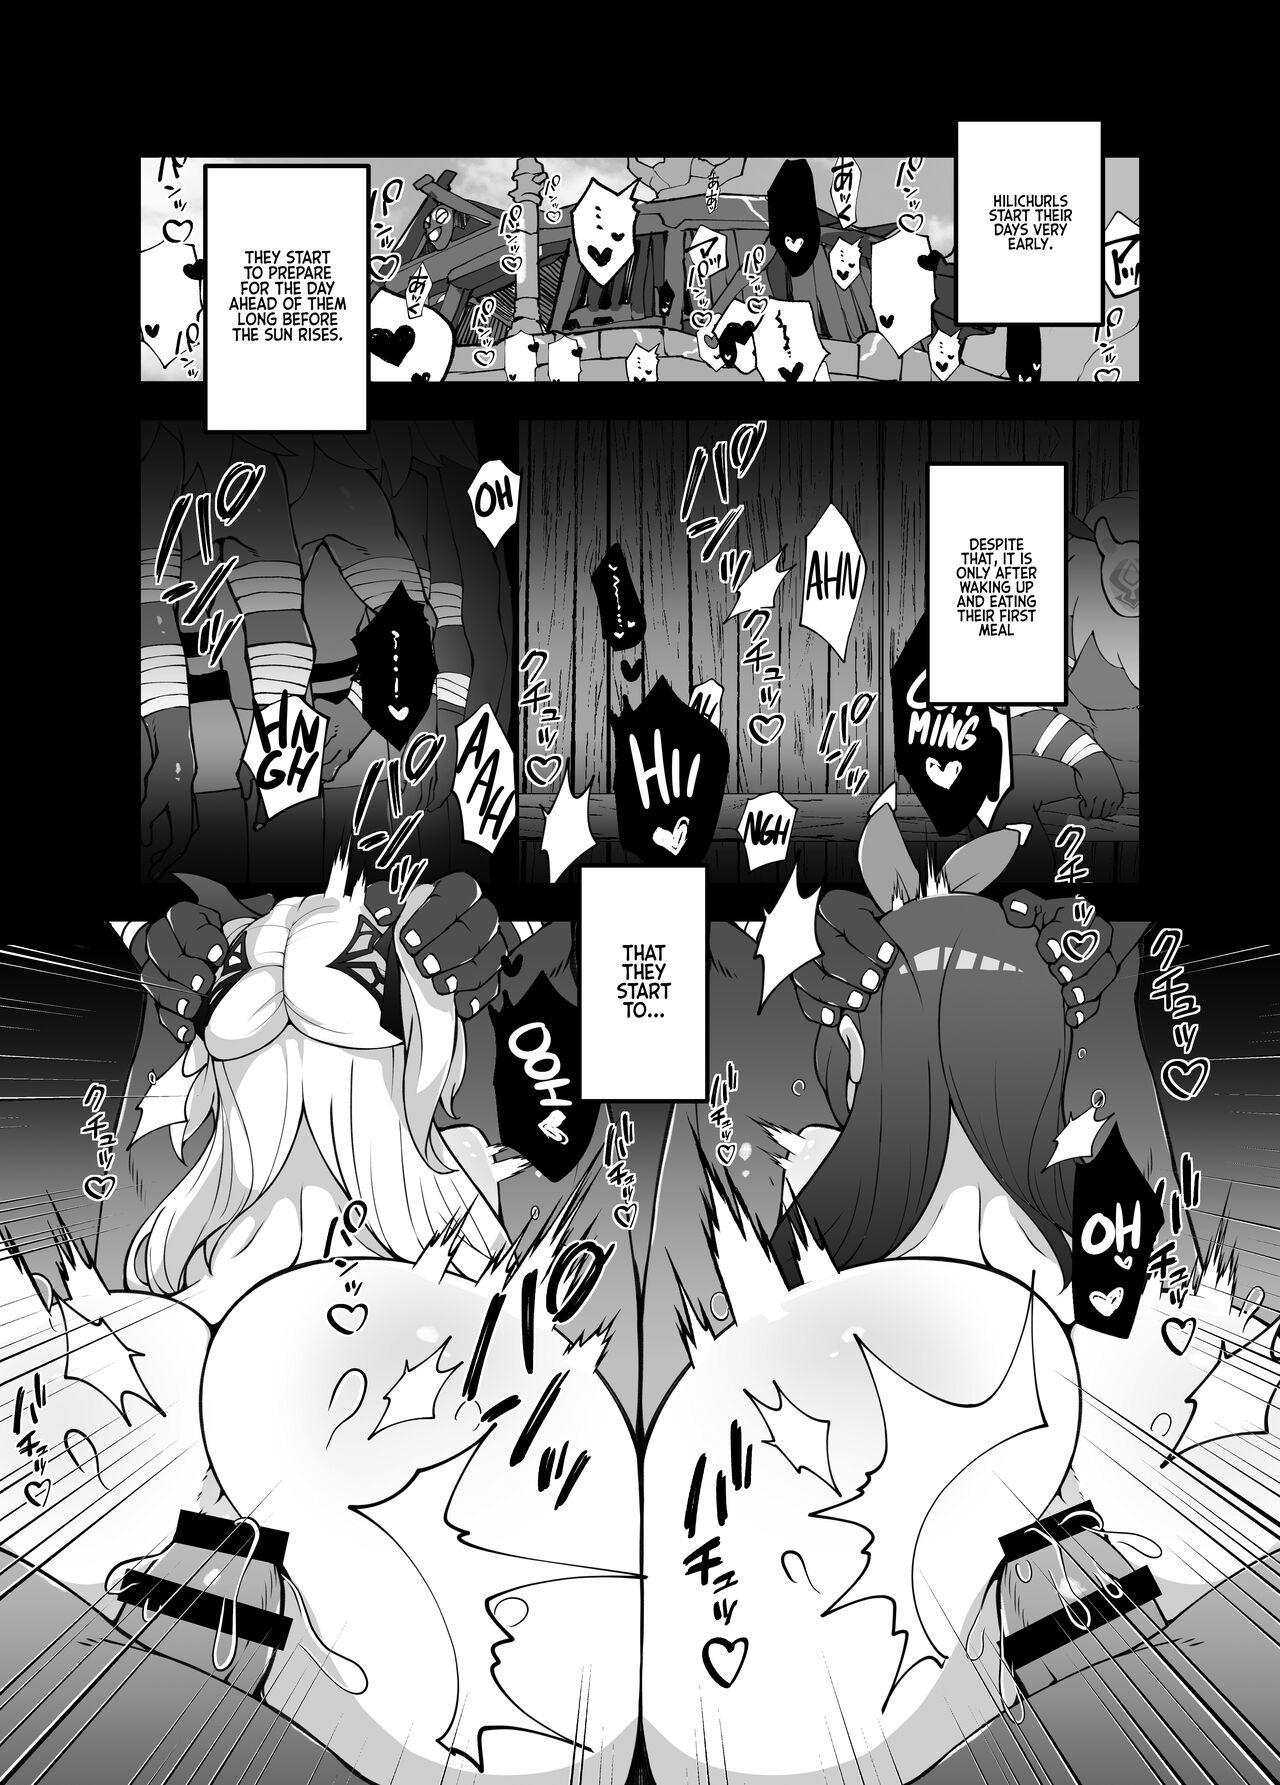 Hotporn [Karouke (Karou)] The Attack of the Hilichurls II ~The Invasion's Prelude~ Noelle,Chivalric Blossom that withered~ (Genshin Impact) [English] [Kyuume] [Digital] - Genshin impact Spy - Picture 3